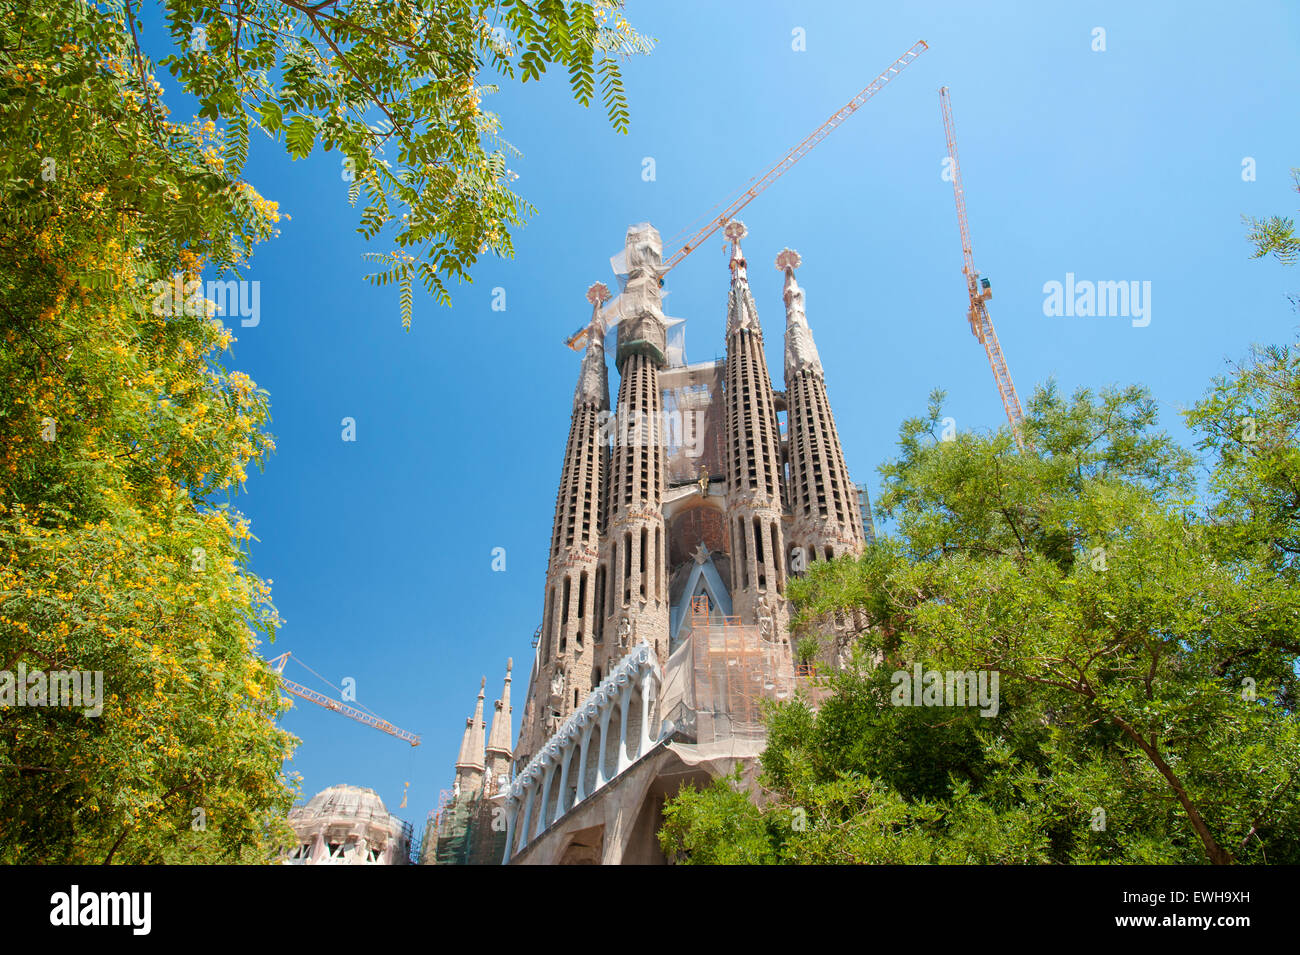 SAGRADA FAMILIA Exterior view of the famous church with cranes and scaffolding designed by Antonio Gaudi. Barcelona Spain Stock Photo